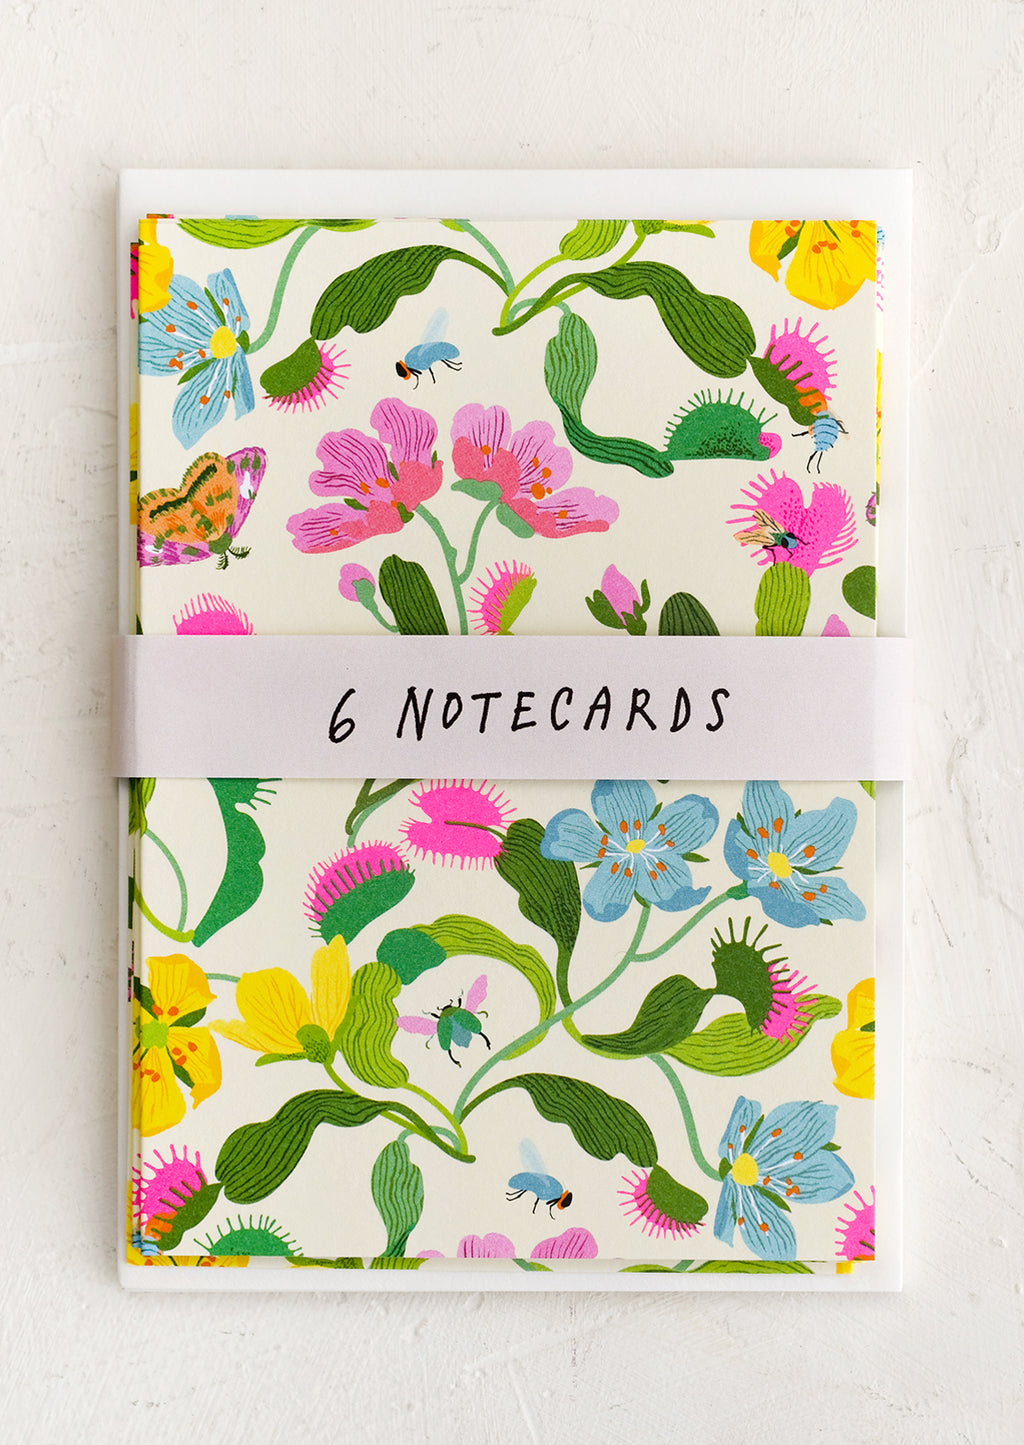 2: A set of notecards with colorful fly trap floral print.